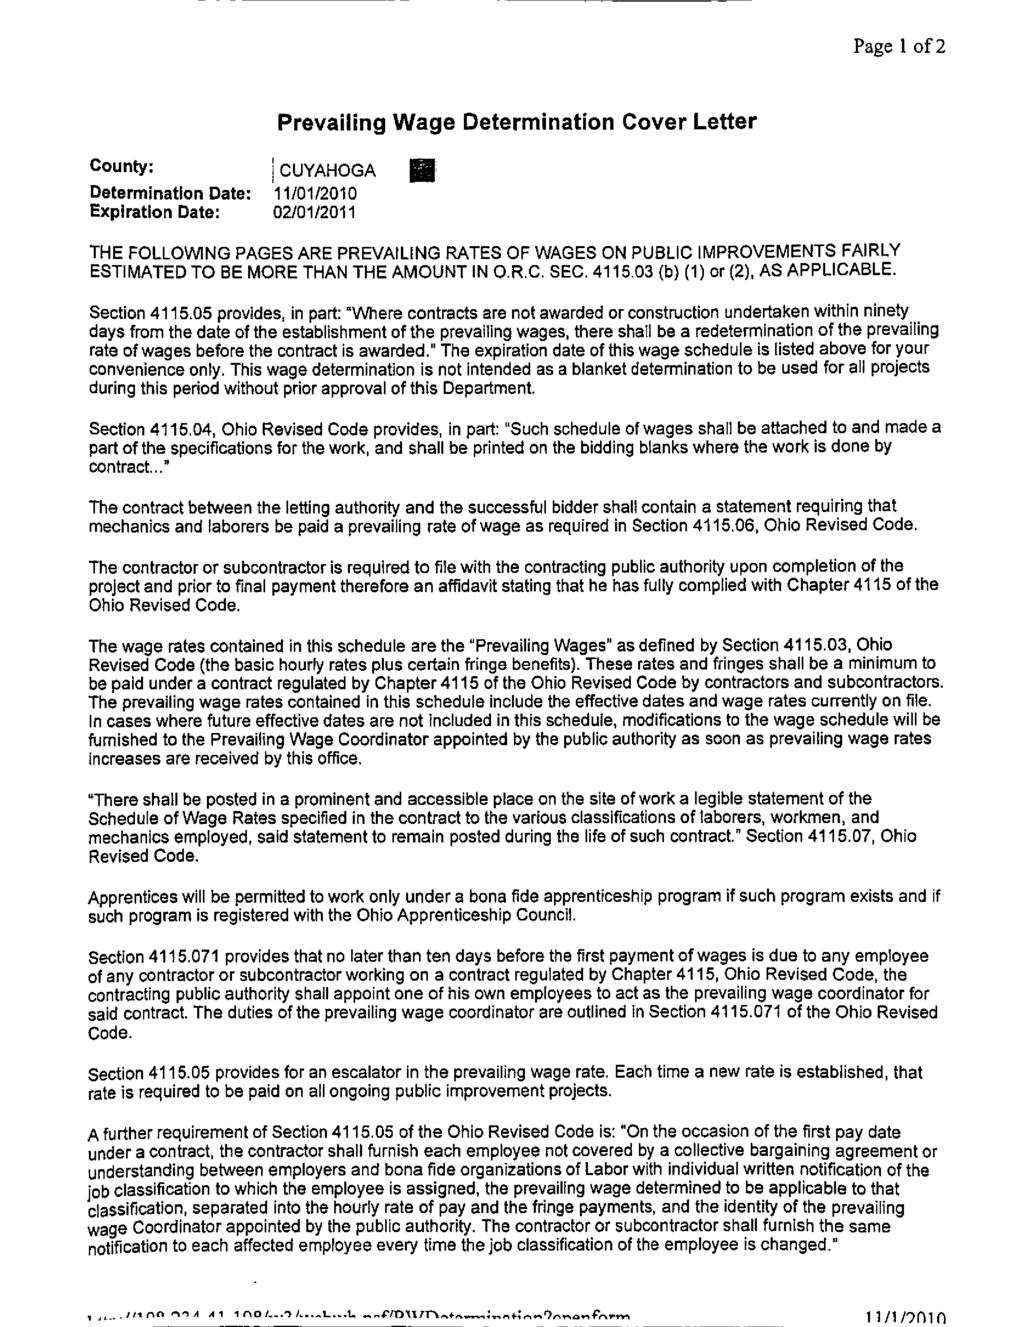 Page 1 of 2 County: ;CUYAHOGA Determination Date: 11/01/2010 Expiration Date: 02/01/2011 Prevailing Wage Determination Cover Letter THE FOLLOVVING PAGES ARE PREVAILING RATES OF WAGES ON PUBLIC